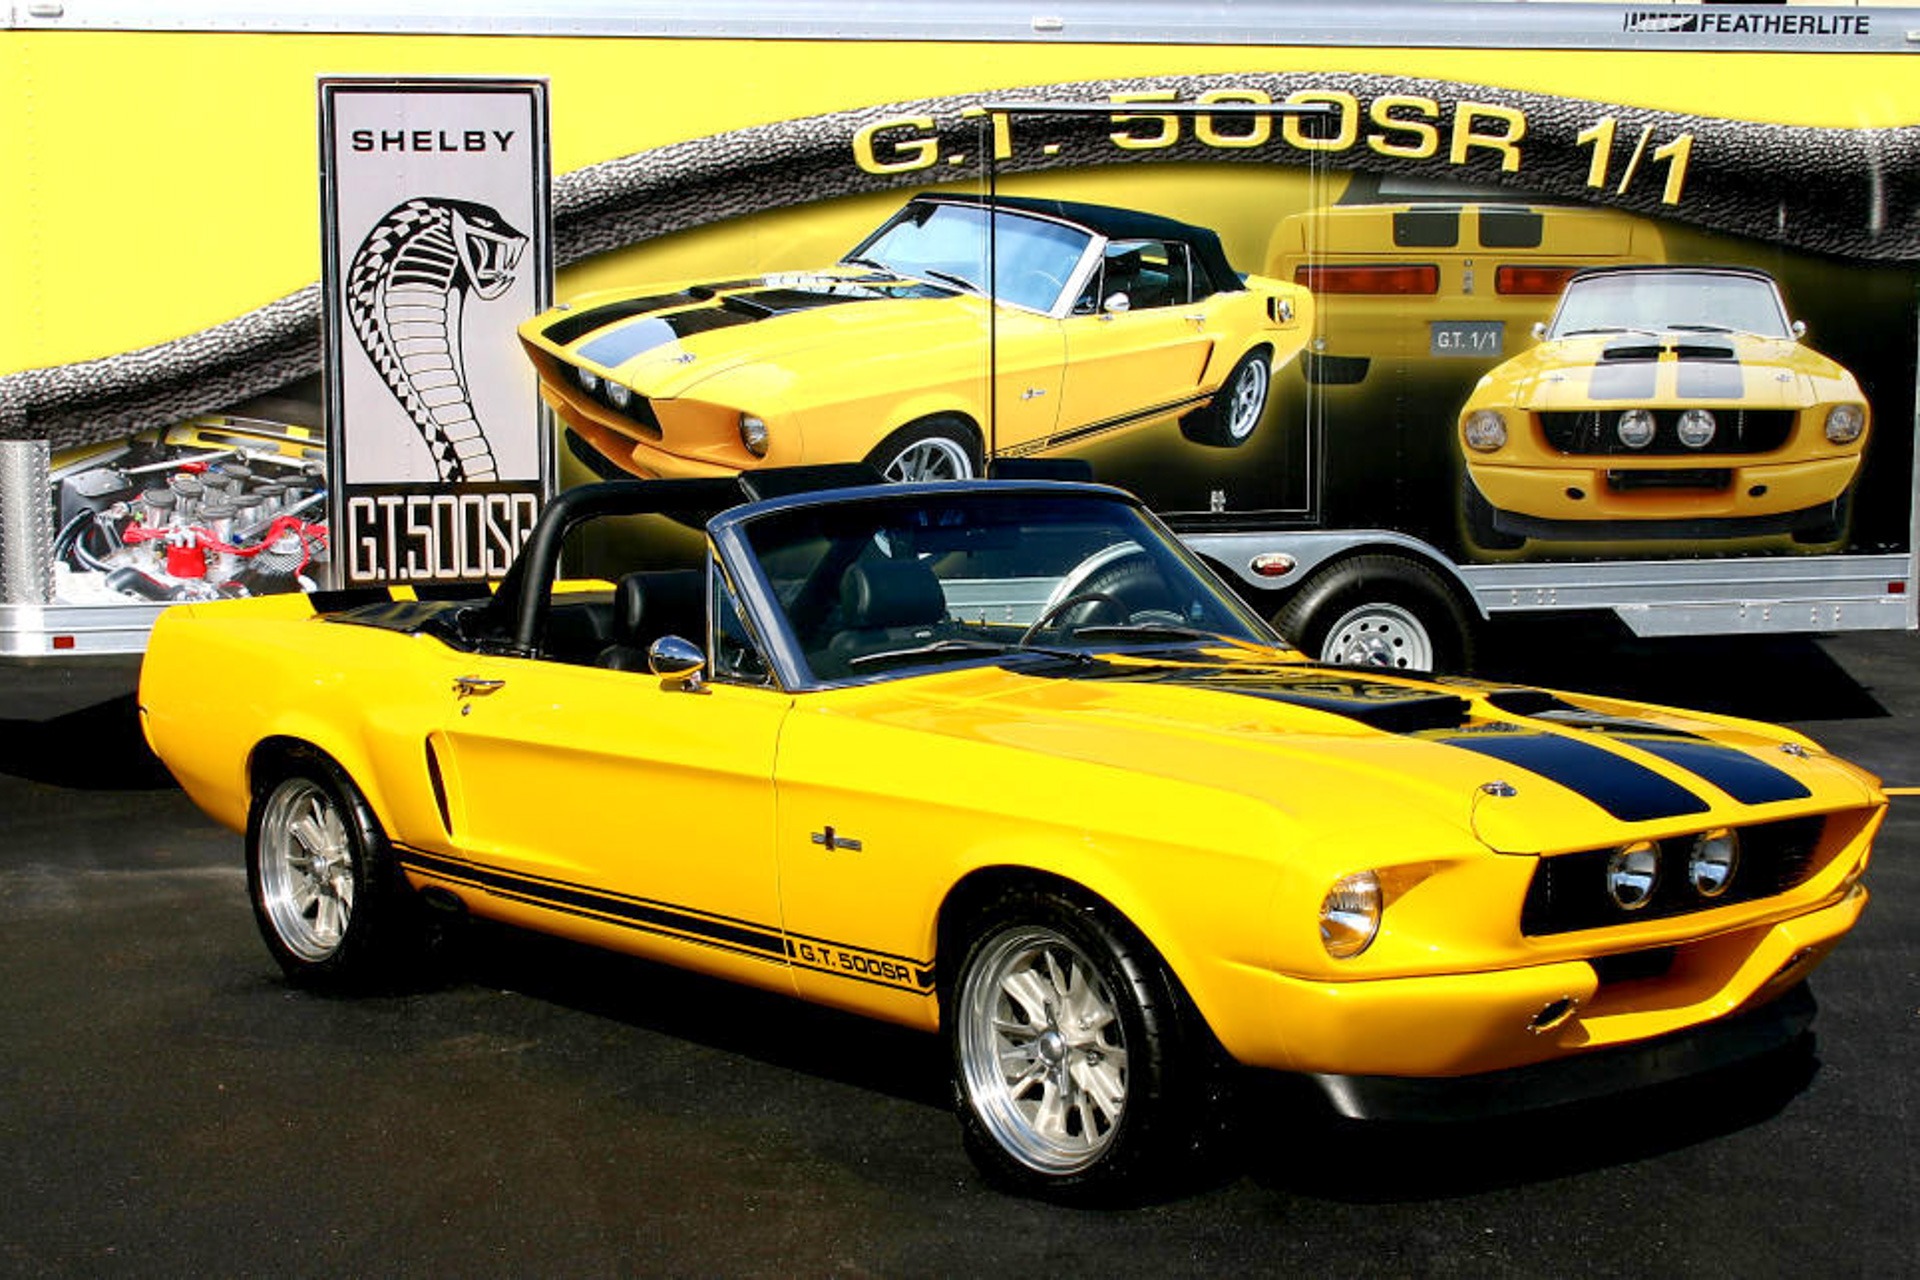 For Sale Used 1968 Ford Mustang Real Shelby GT500-SR, 427/725hp | American Dream Machines Des Moines IA 50309